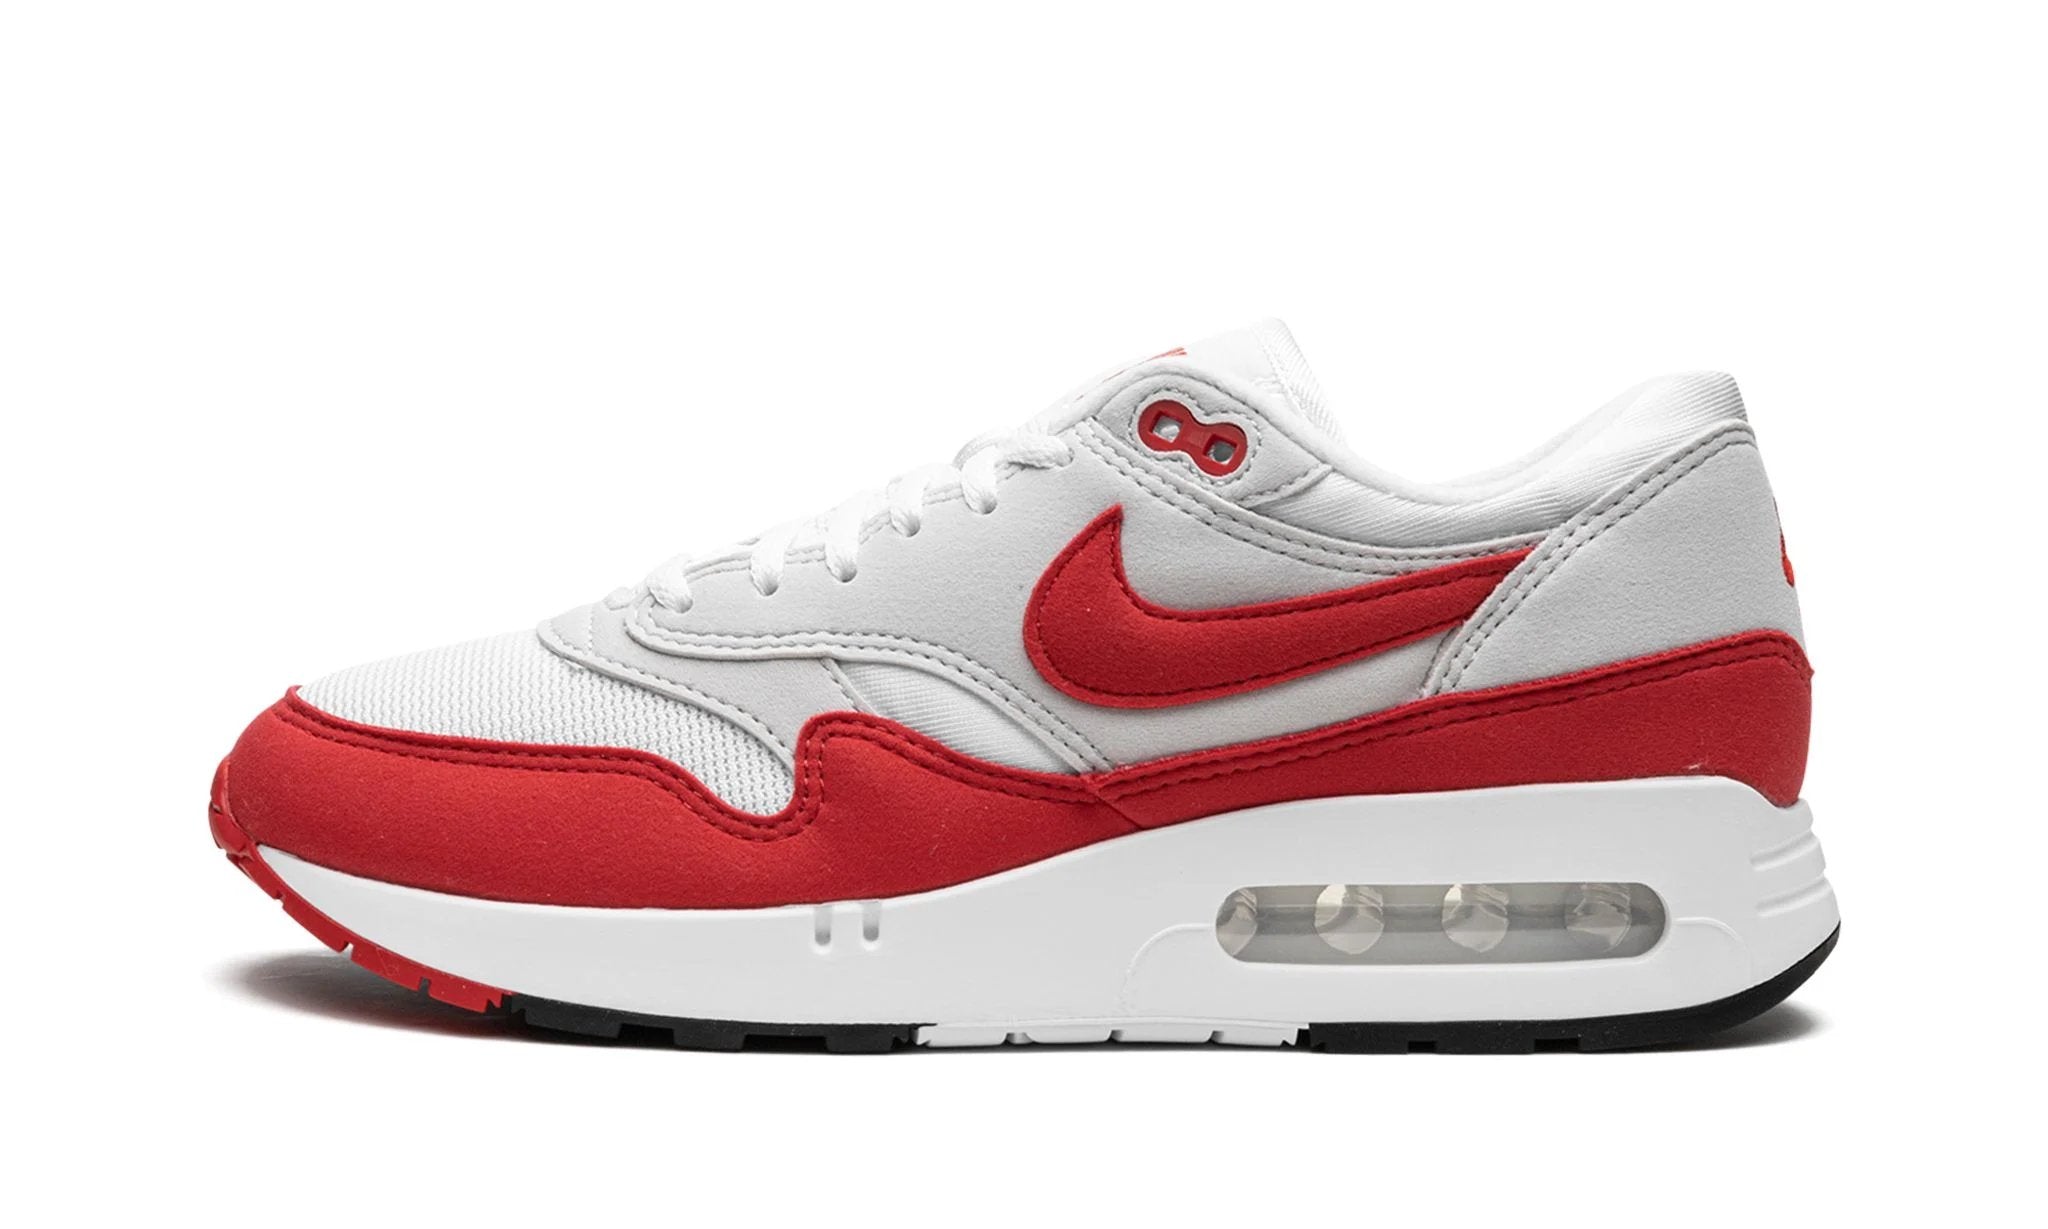 Nike Air Max 1 '86 OG Big Bubble Sport Red (Women's) - DO9844-100 - Sneakers